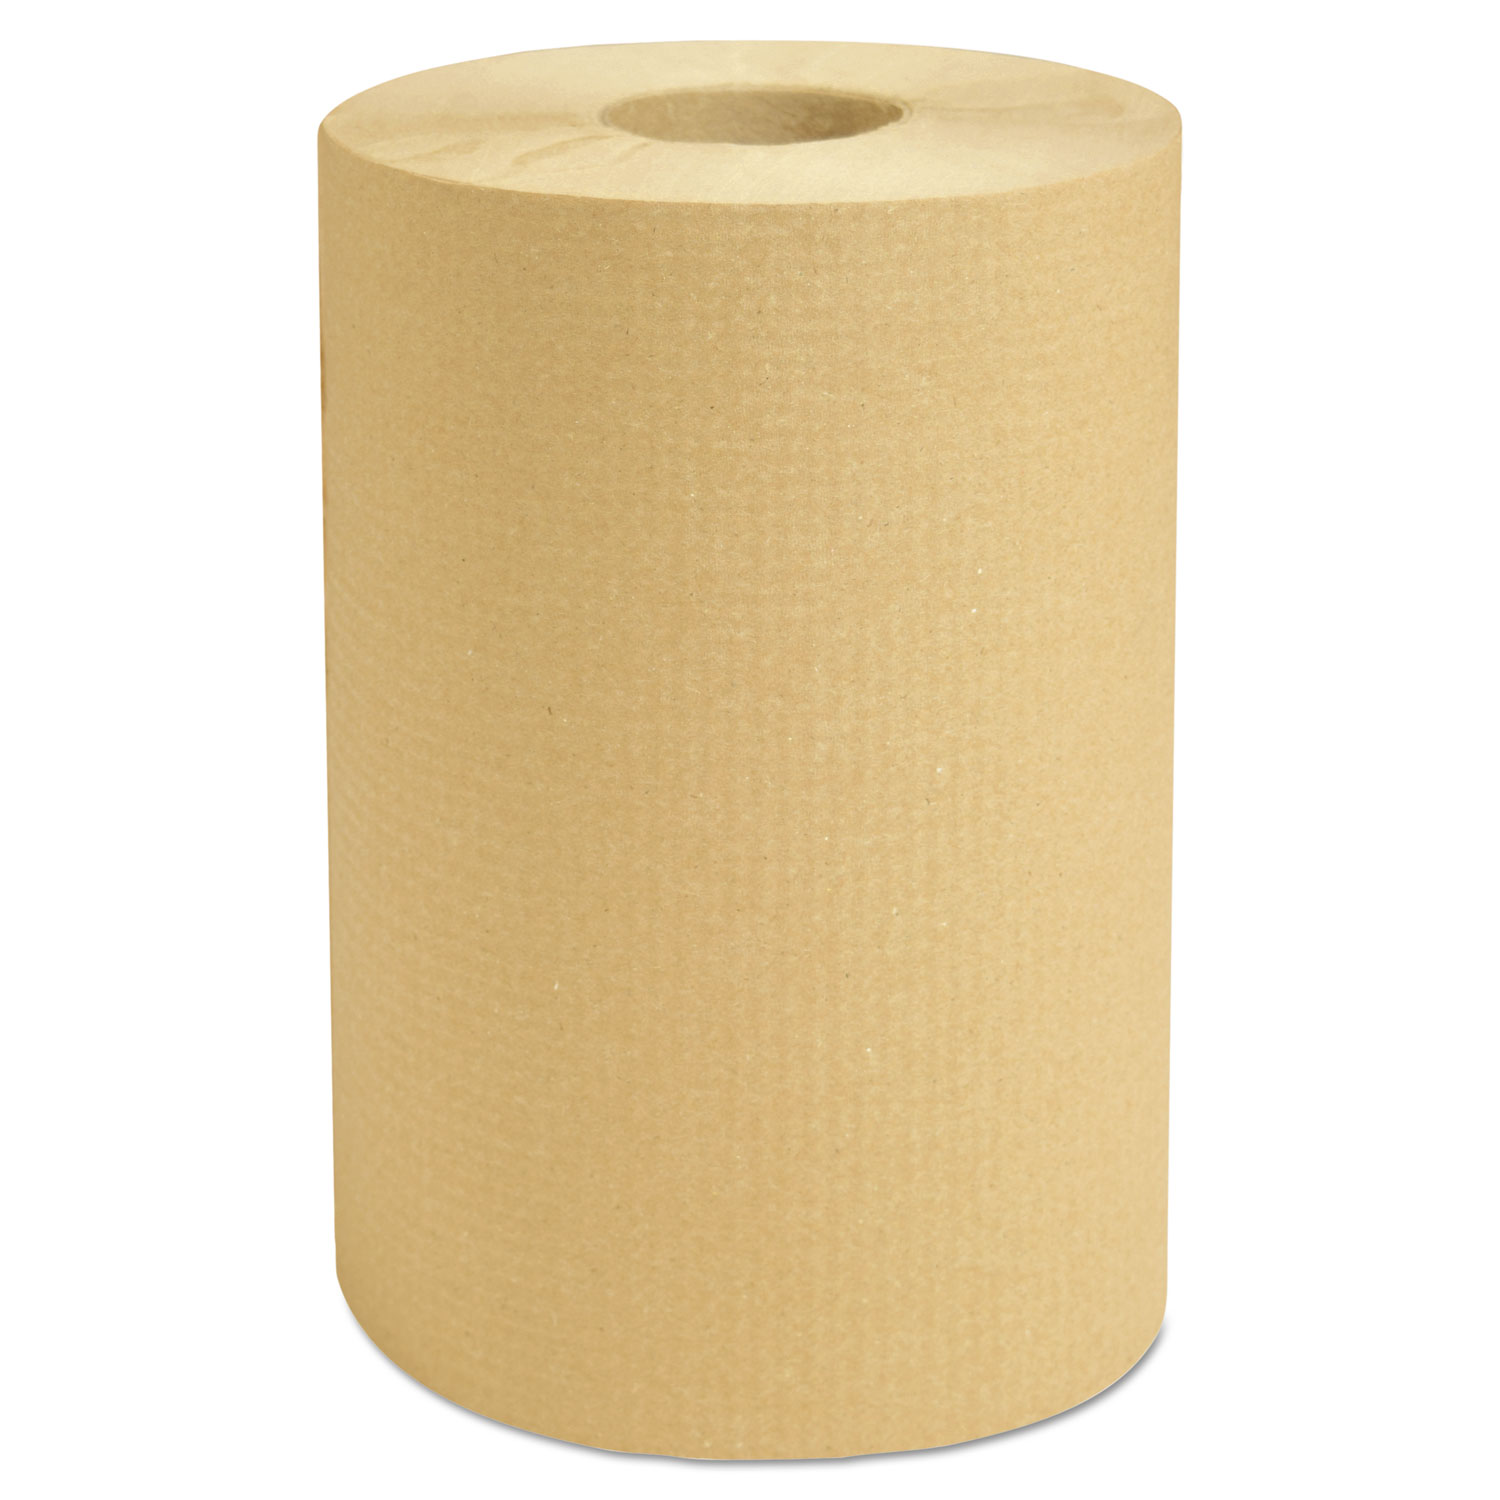  Cascades PRO H235 North River Hardwound Roll Towels, Natural, 7 7/8 in x 350 ft, 12/Carton (CSD1313) 